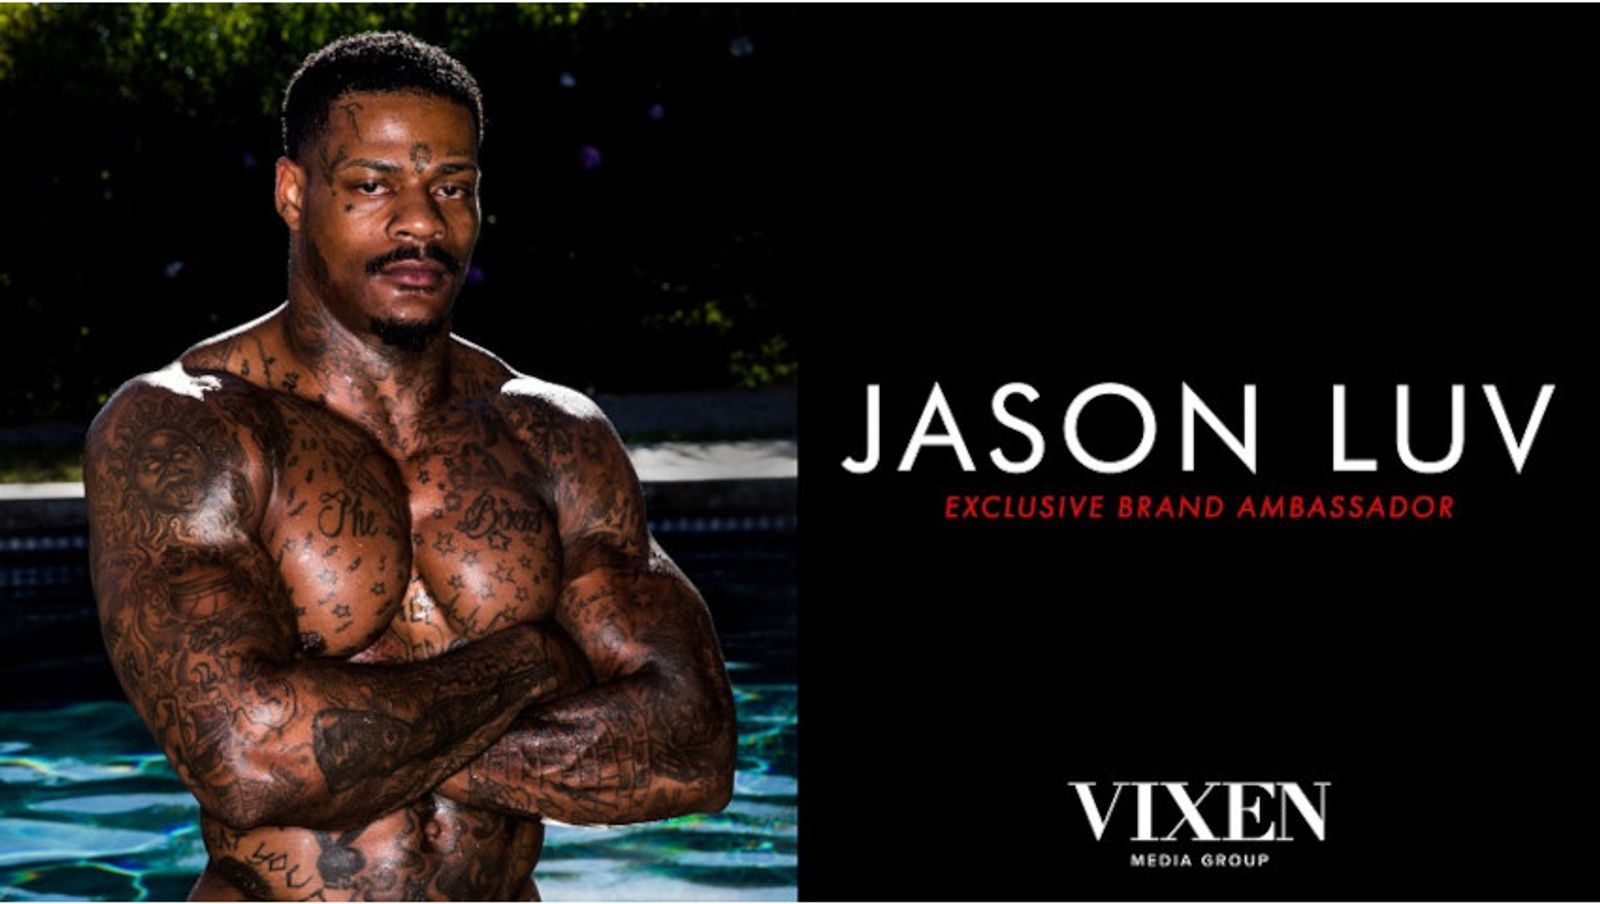 chris toner recommends jason luv blacked pic